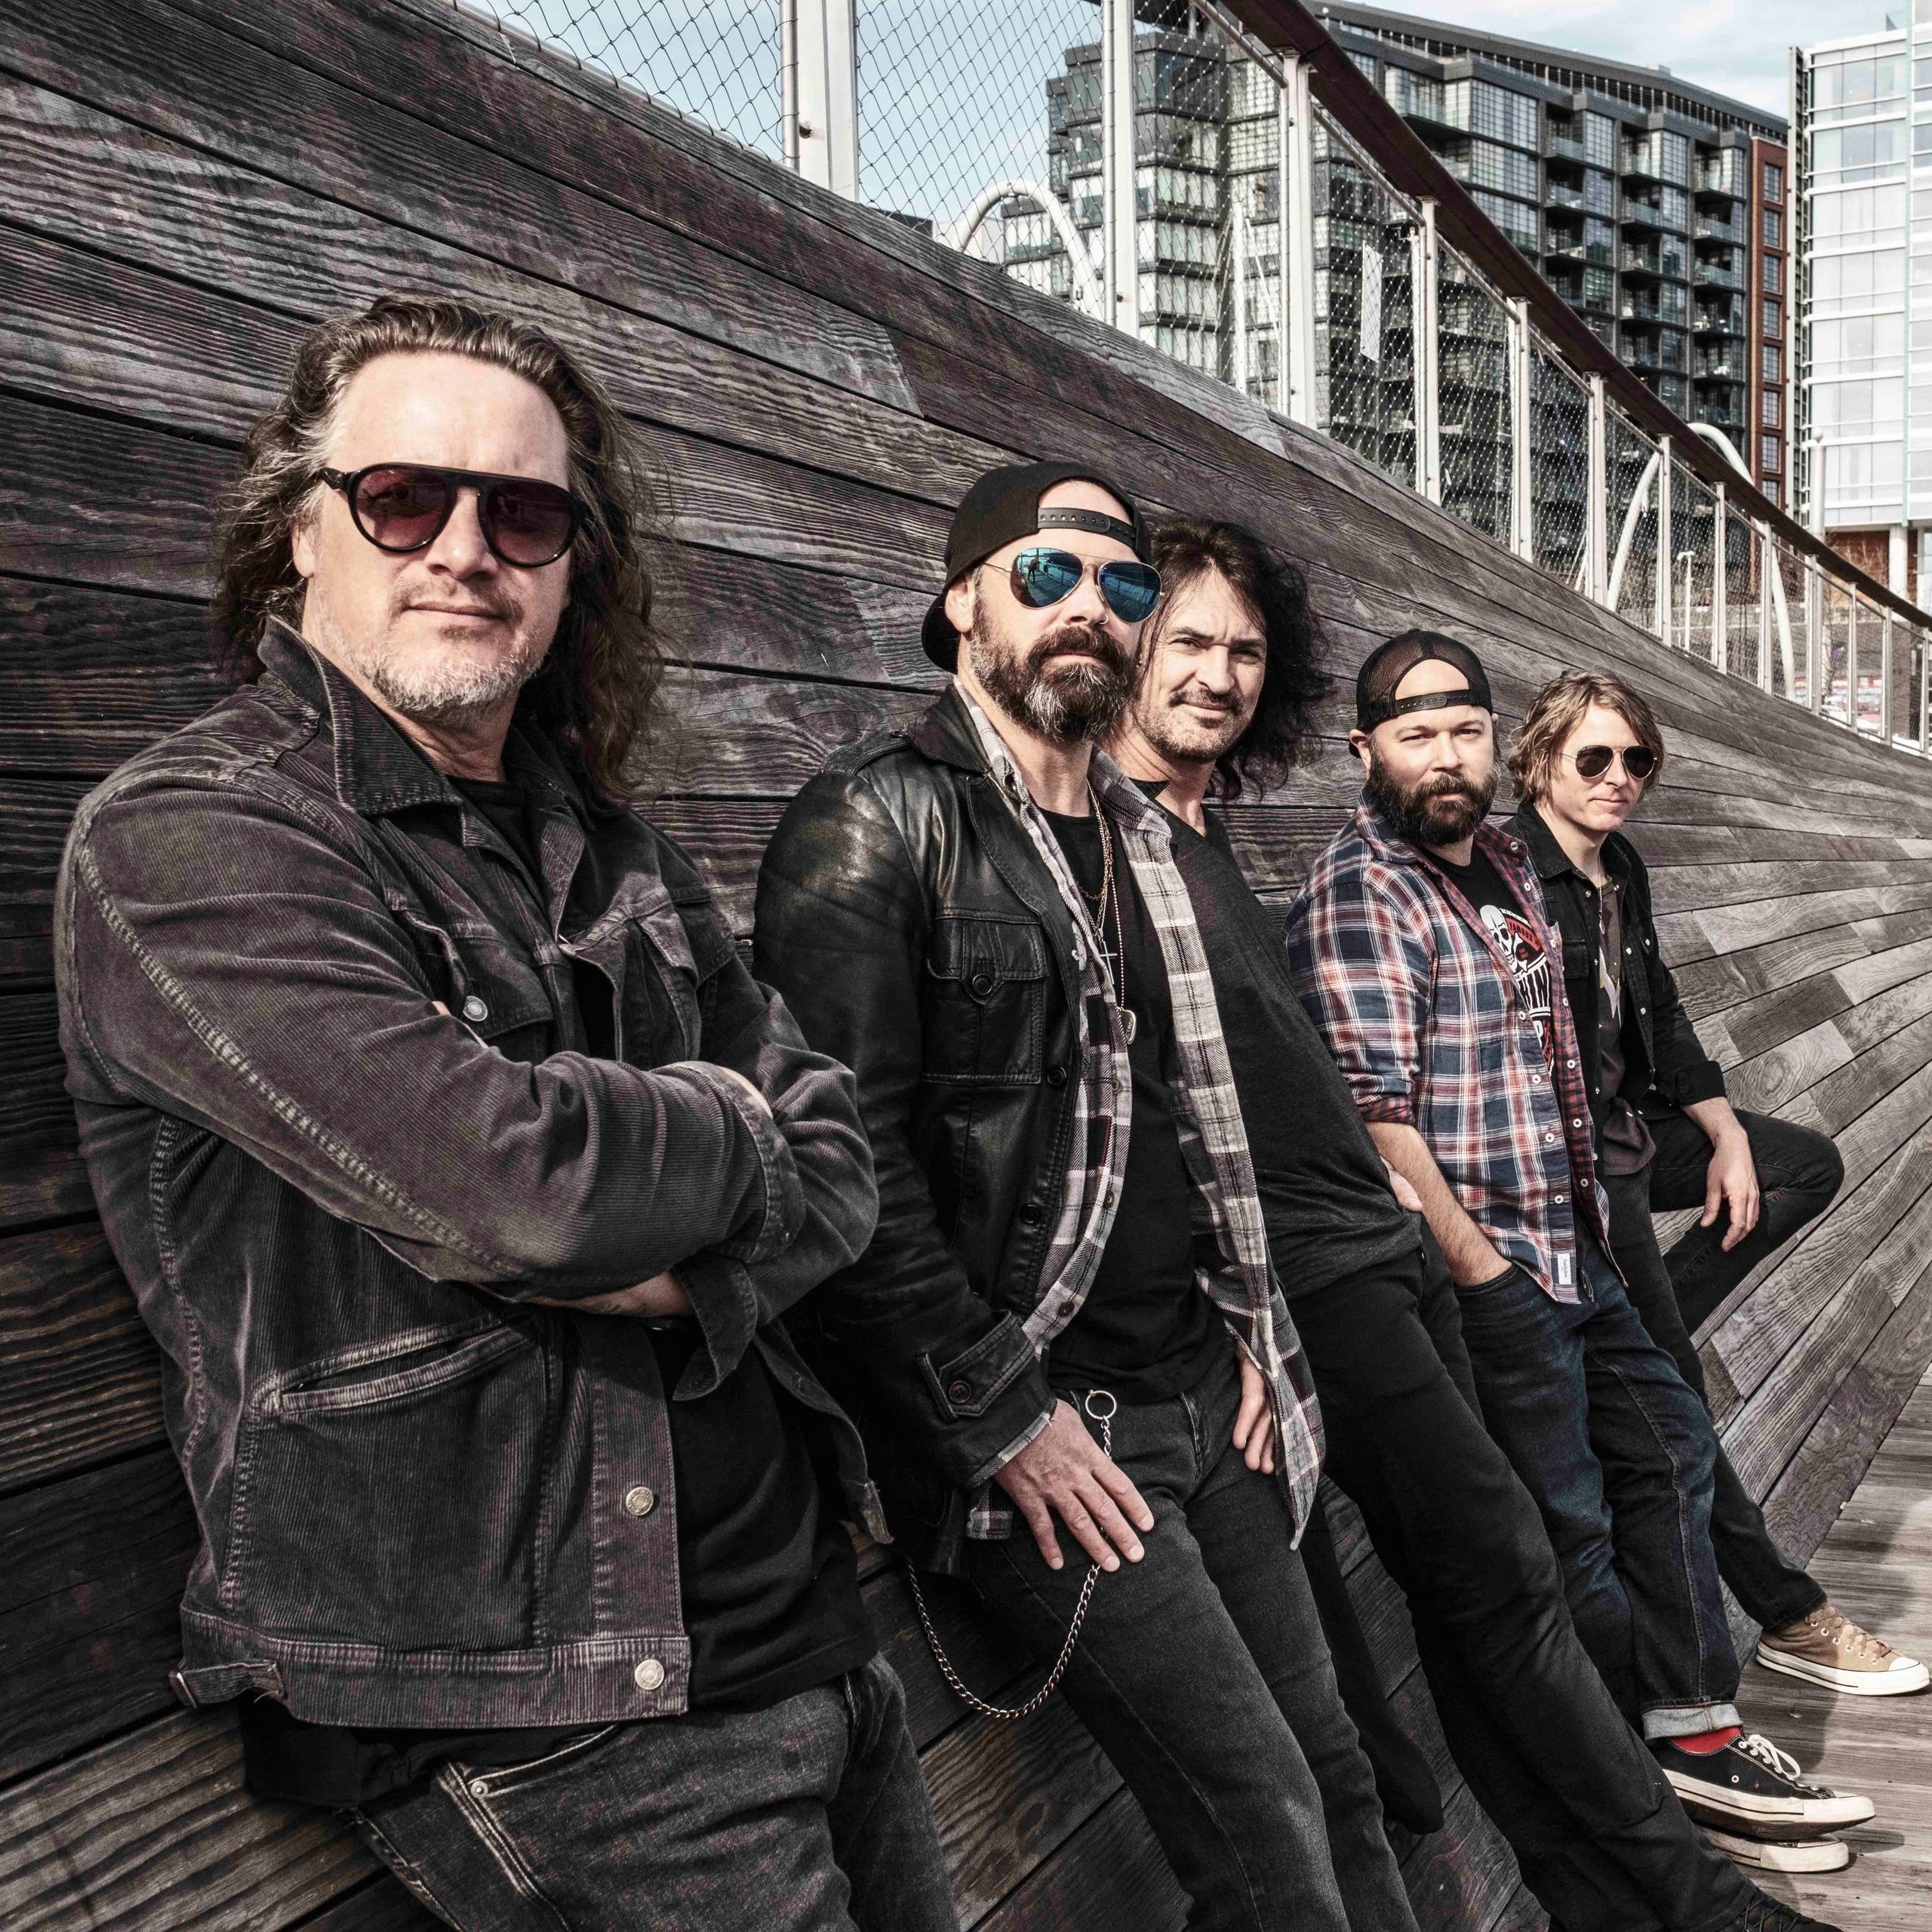 Candlebox's Last U.S. Tour + Special Guest On 3 Doors Down Tour